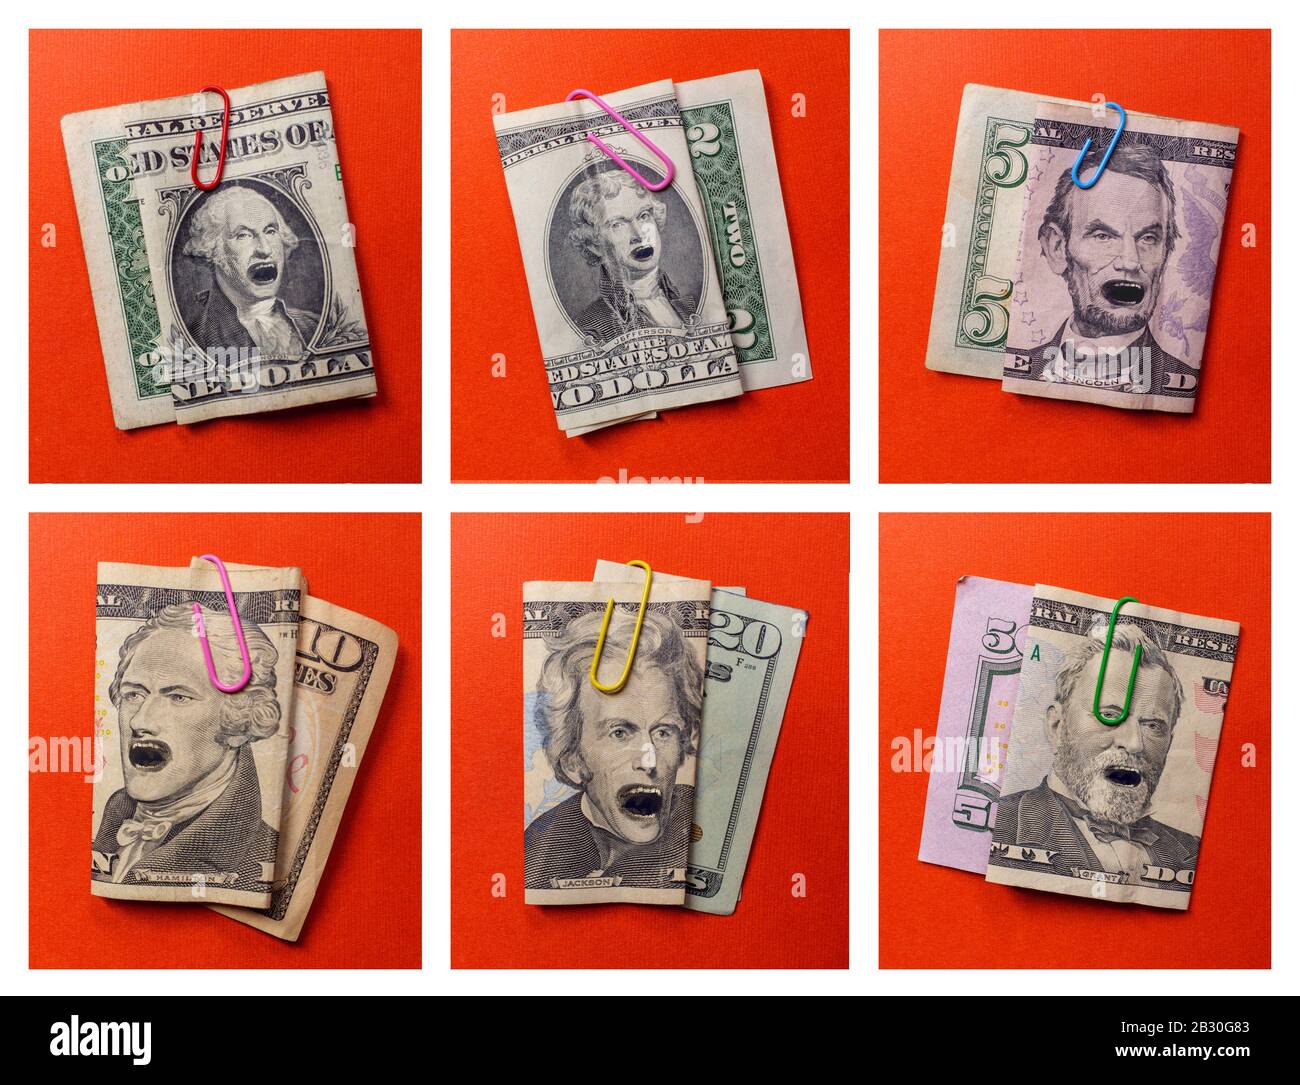 Angry founding fathers yelling in pictures on American money Stock Photo